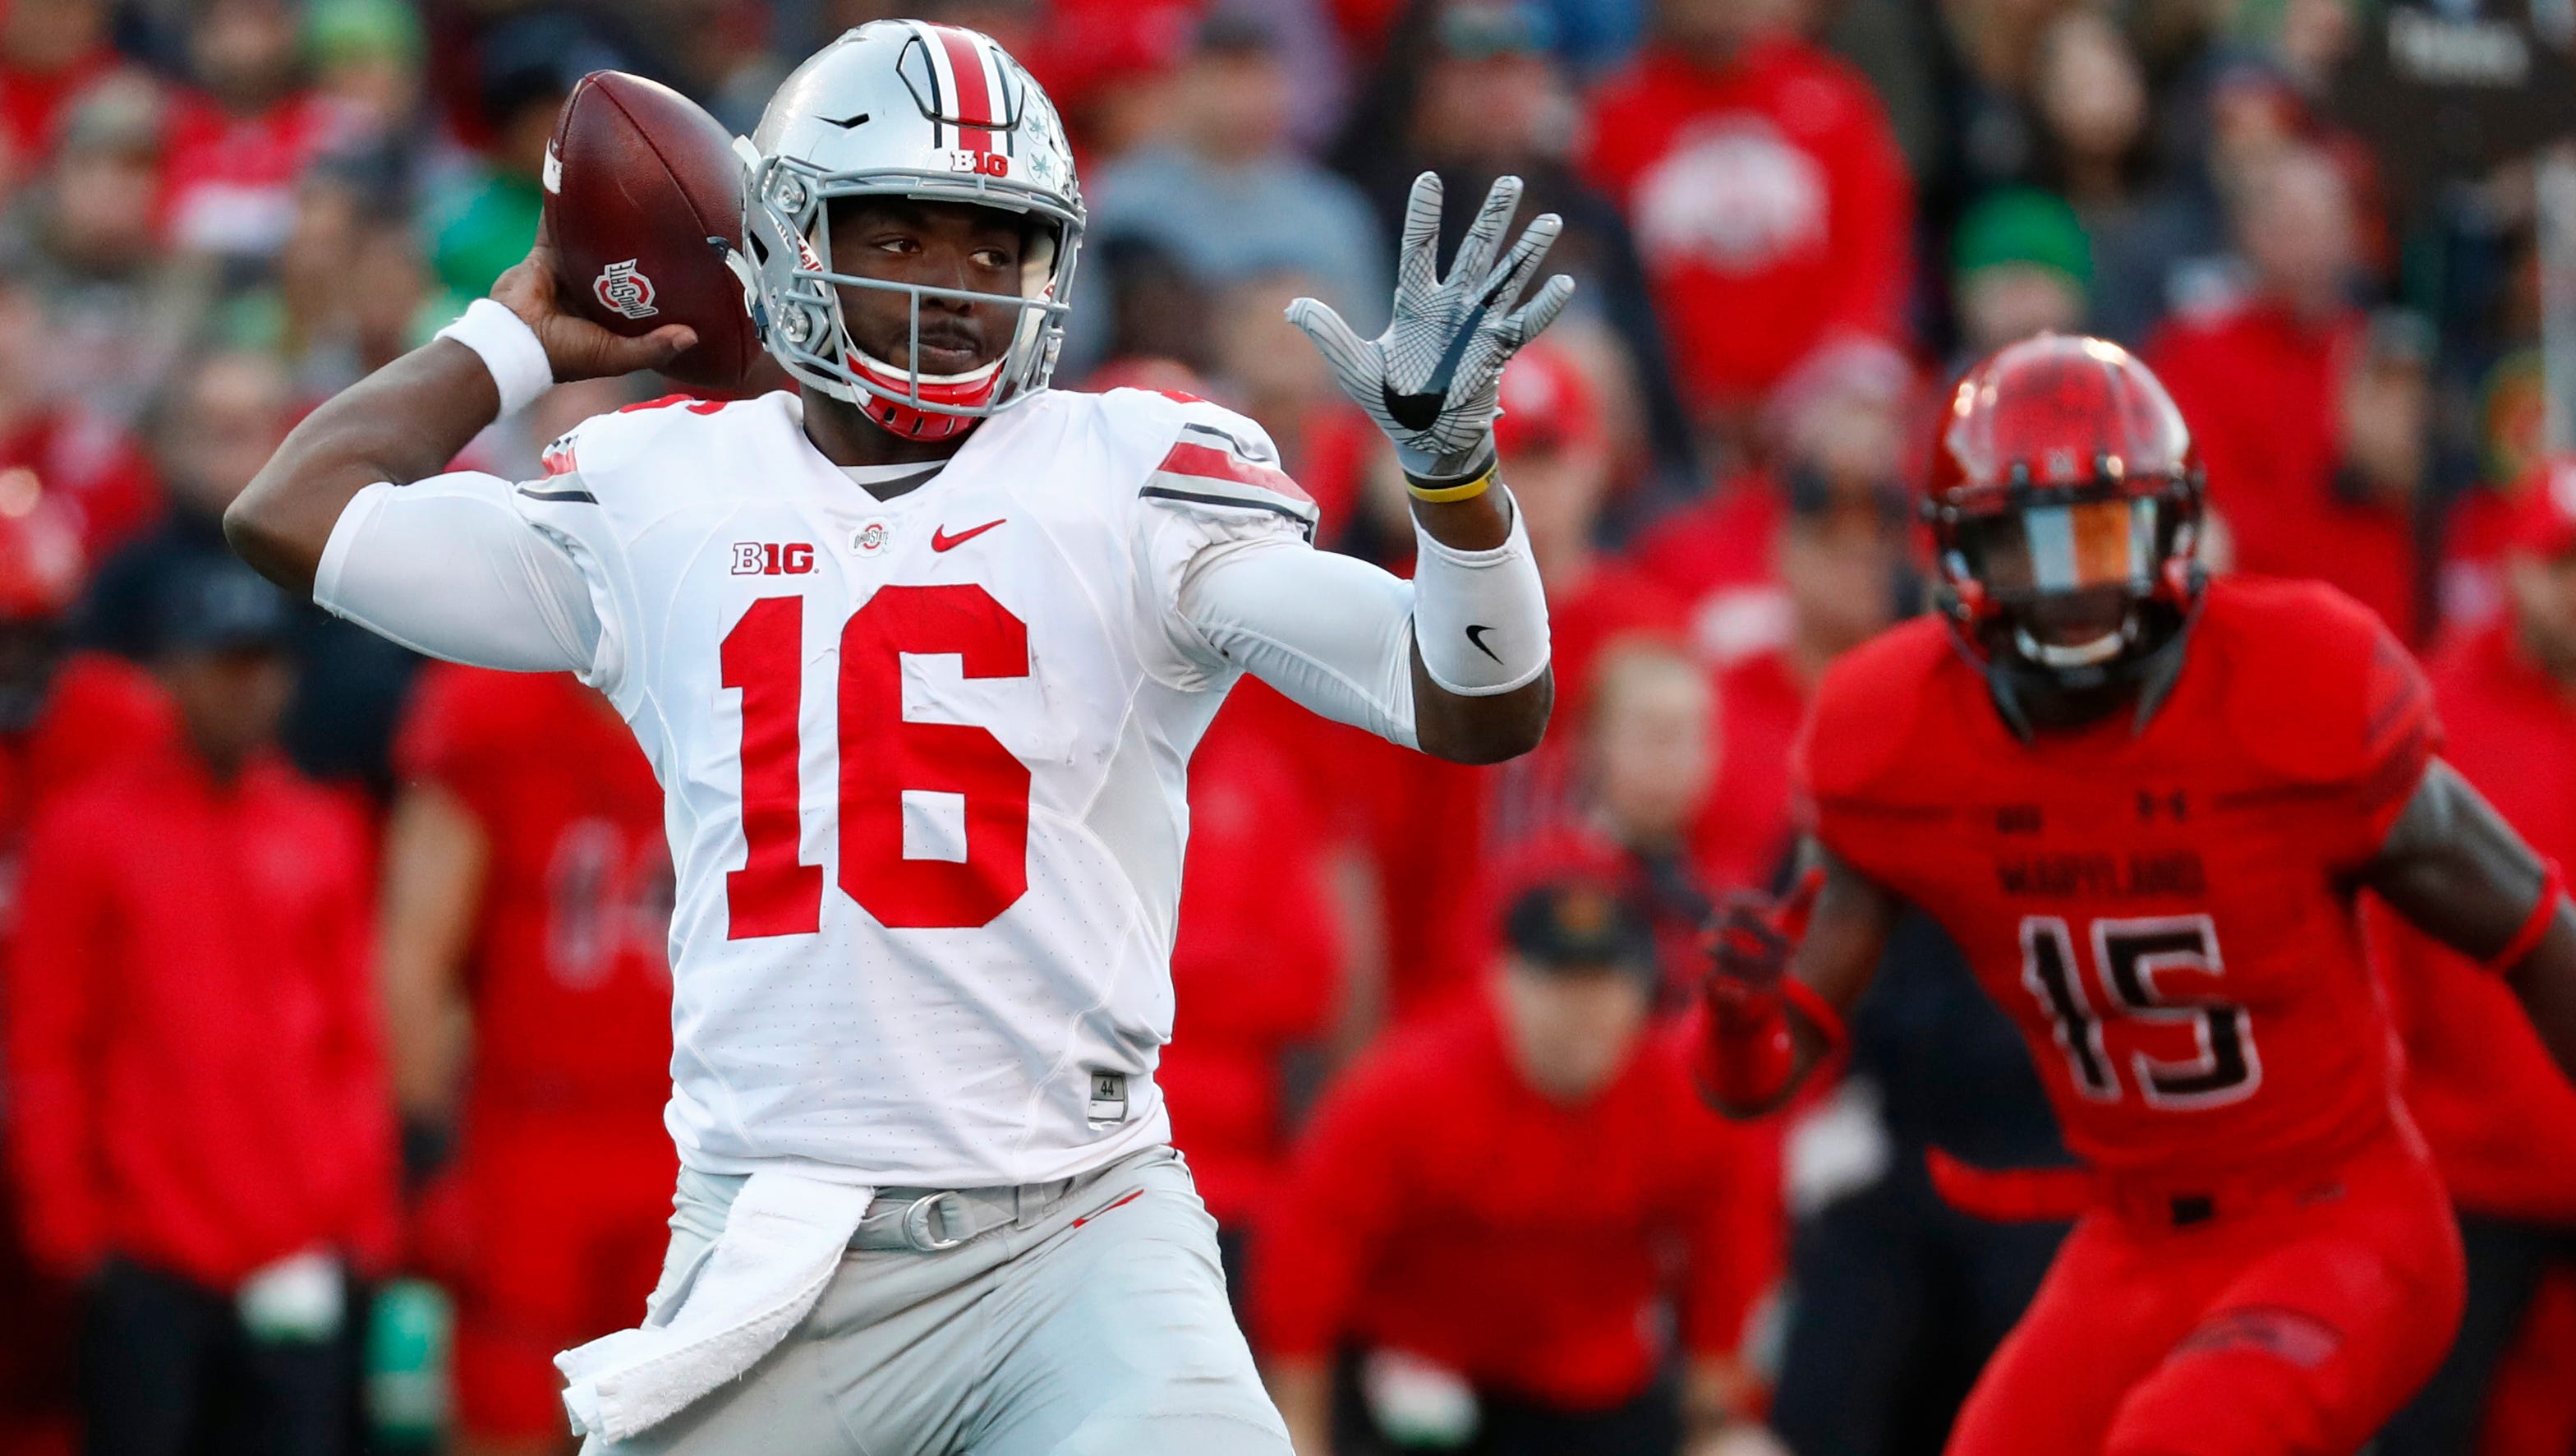 Barrett engineers no ohio states rout of maryland